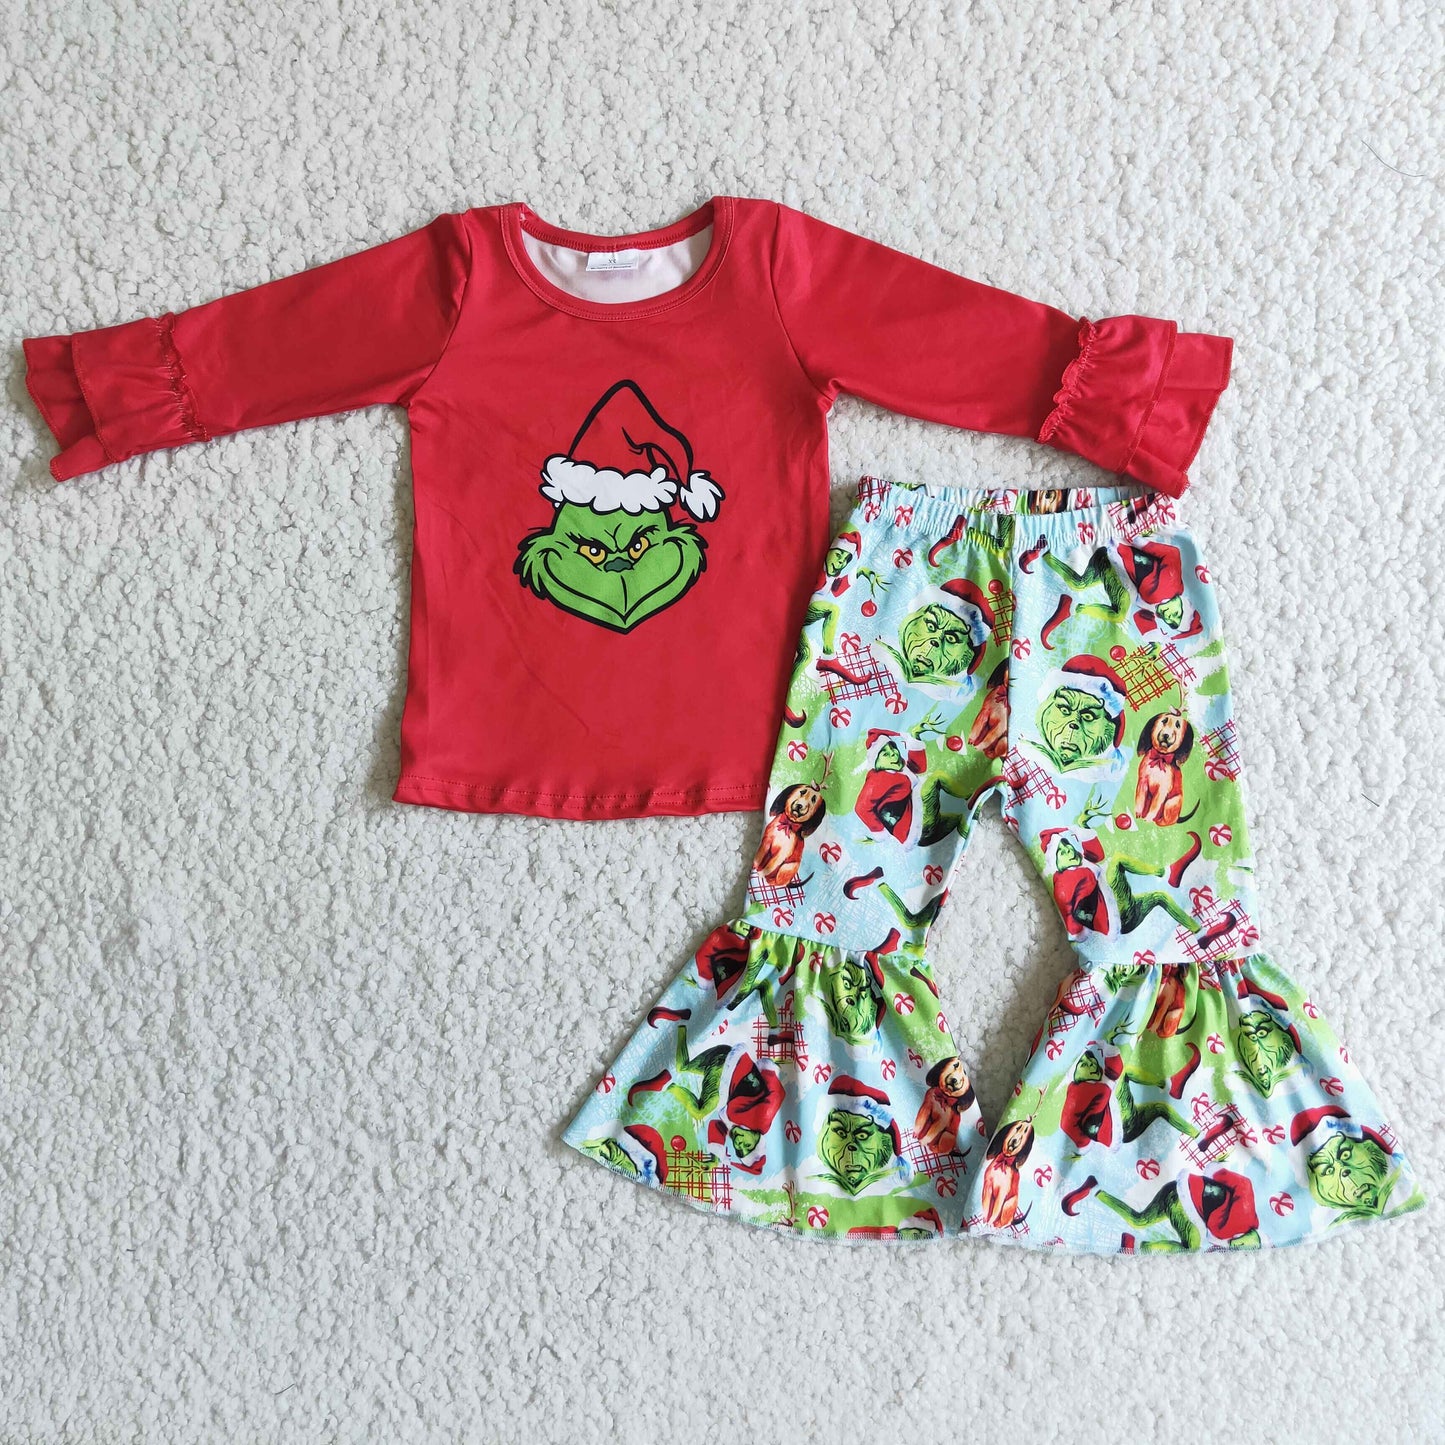 Girls new design Christmas outfit